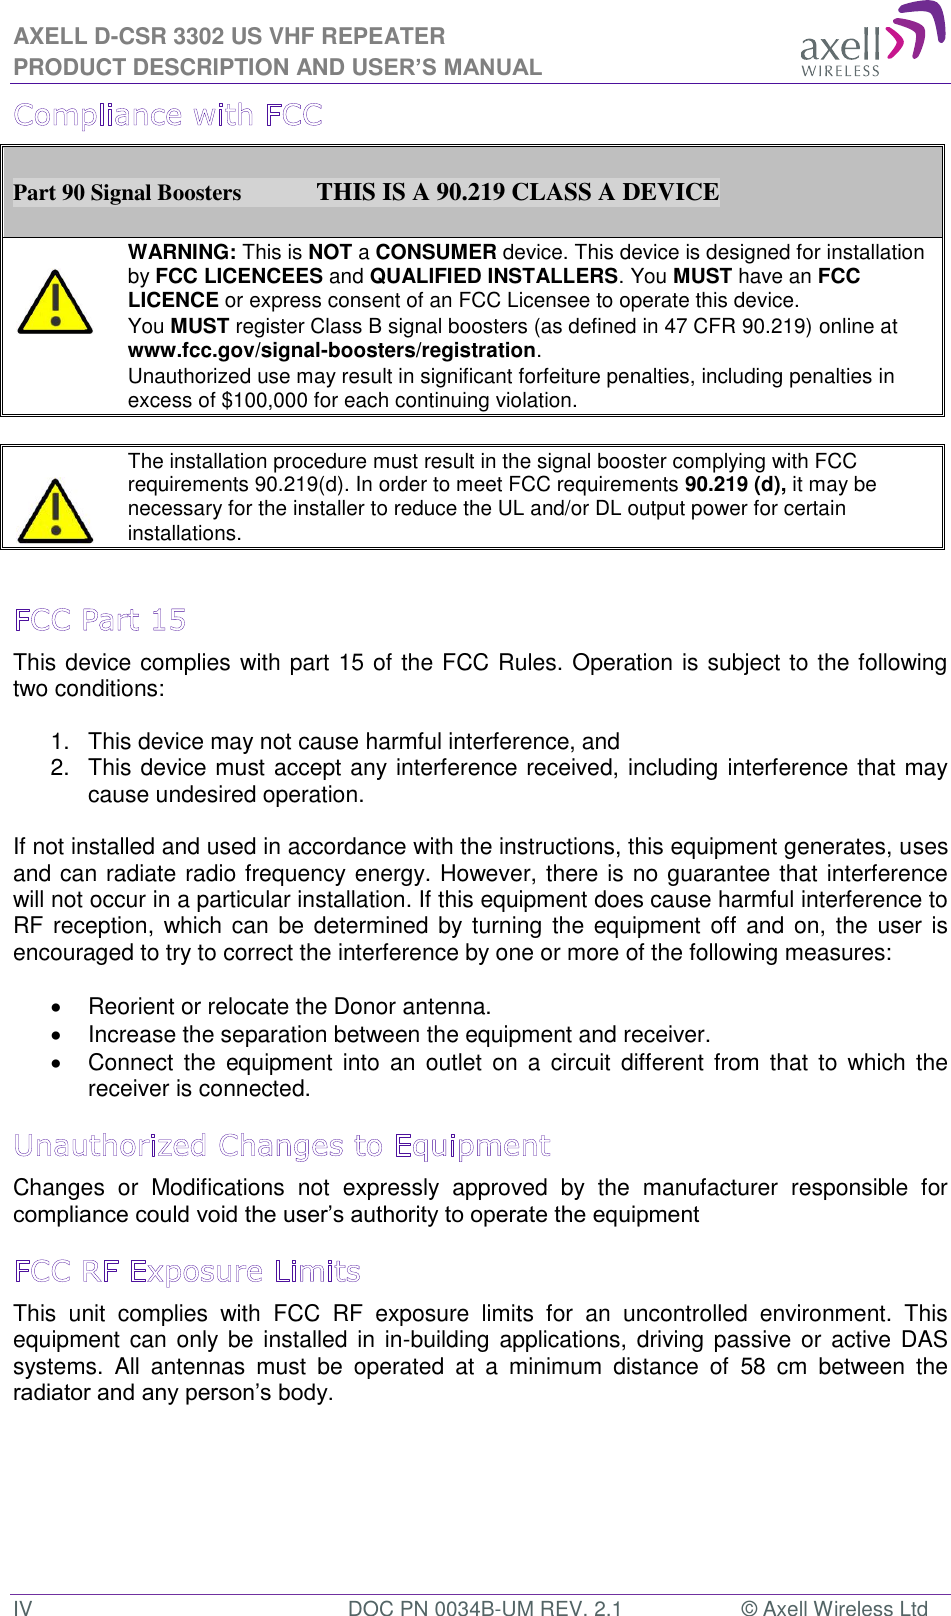 AXELL D-CSR 3302 US VHF REPEATER PRODUCT DESCRIPTION AND USER’S MANUAL IV  DOC PN 0034B-UM REV. 2.1  © Axell Wireless Ltd  Part 90 Signal Boosters             THIS IS A 90.219 CLASS A DEVICE    WARNING: This is NOT a CONSUMER device. This device is designed for installation by FCC LICENCEES and QUALIFIED INSTALLERS. You MUST have an FCC LICENCE or express consent of an FCC Licensee to operate this device.  You MUST register Class B signal boosters (as defined in 47 CFR 90.219) online at www.fcc.gov/signal-boosters/registration.  Unauthorized use may result in significant forfeiture penalties, including penalties in excess of $100,000 for each continuing violation.      The installation procedure must result in the signal booster complying with FCC requirements 90.219(d). In order to meet FCC requirements 90.219 (d), it may be necessary for the installer to reduce the UL and/or DL output power for certain installations.    This device complies with part 15 of the FCC Rules. Operation is subject to the following two conditions:   1.  This device may not cause harmful interference, and   2.  This device must accept any interference received, including interference that may cause undesired operation.   If not installed and used in accordance with the instructions, this equipment generates, uses and can radiate radio frequency energy. However, there is no guarantee that interference will not occur in a particular installation. If this equipment does cause harmful interference to RF reception,  which can  be determined by turning  the equipment off and on,  the user is encouraged to try to correct the interference by one or more of the following measures:    Reorient or relocate the Donor antenna.   Increase the separation between the equipment and receiver.   Connect  the  equipment  into  an  outlet  on a circuit  different  from  that to which  the receiver is connected. Changes  or  Modifications  not  expressly  approved  by  the  manufacturer  responsible  for compliance could void the user’s authority to operate the equipment This  unit  complies  with  FCC  RF  exposure  limits  for  an  uncontrolled  environment.  This equipment can only be  installed in in-building applications, driving passive or  active DAS systems.  All  antennas  must  be  operated  at  a  minimum  distance  of  58  cm  between  the radiator and any person’s body.    